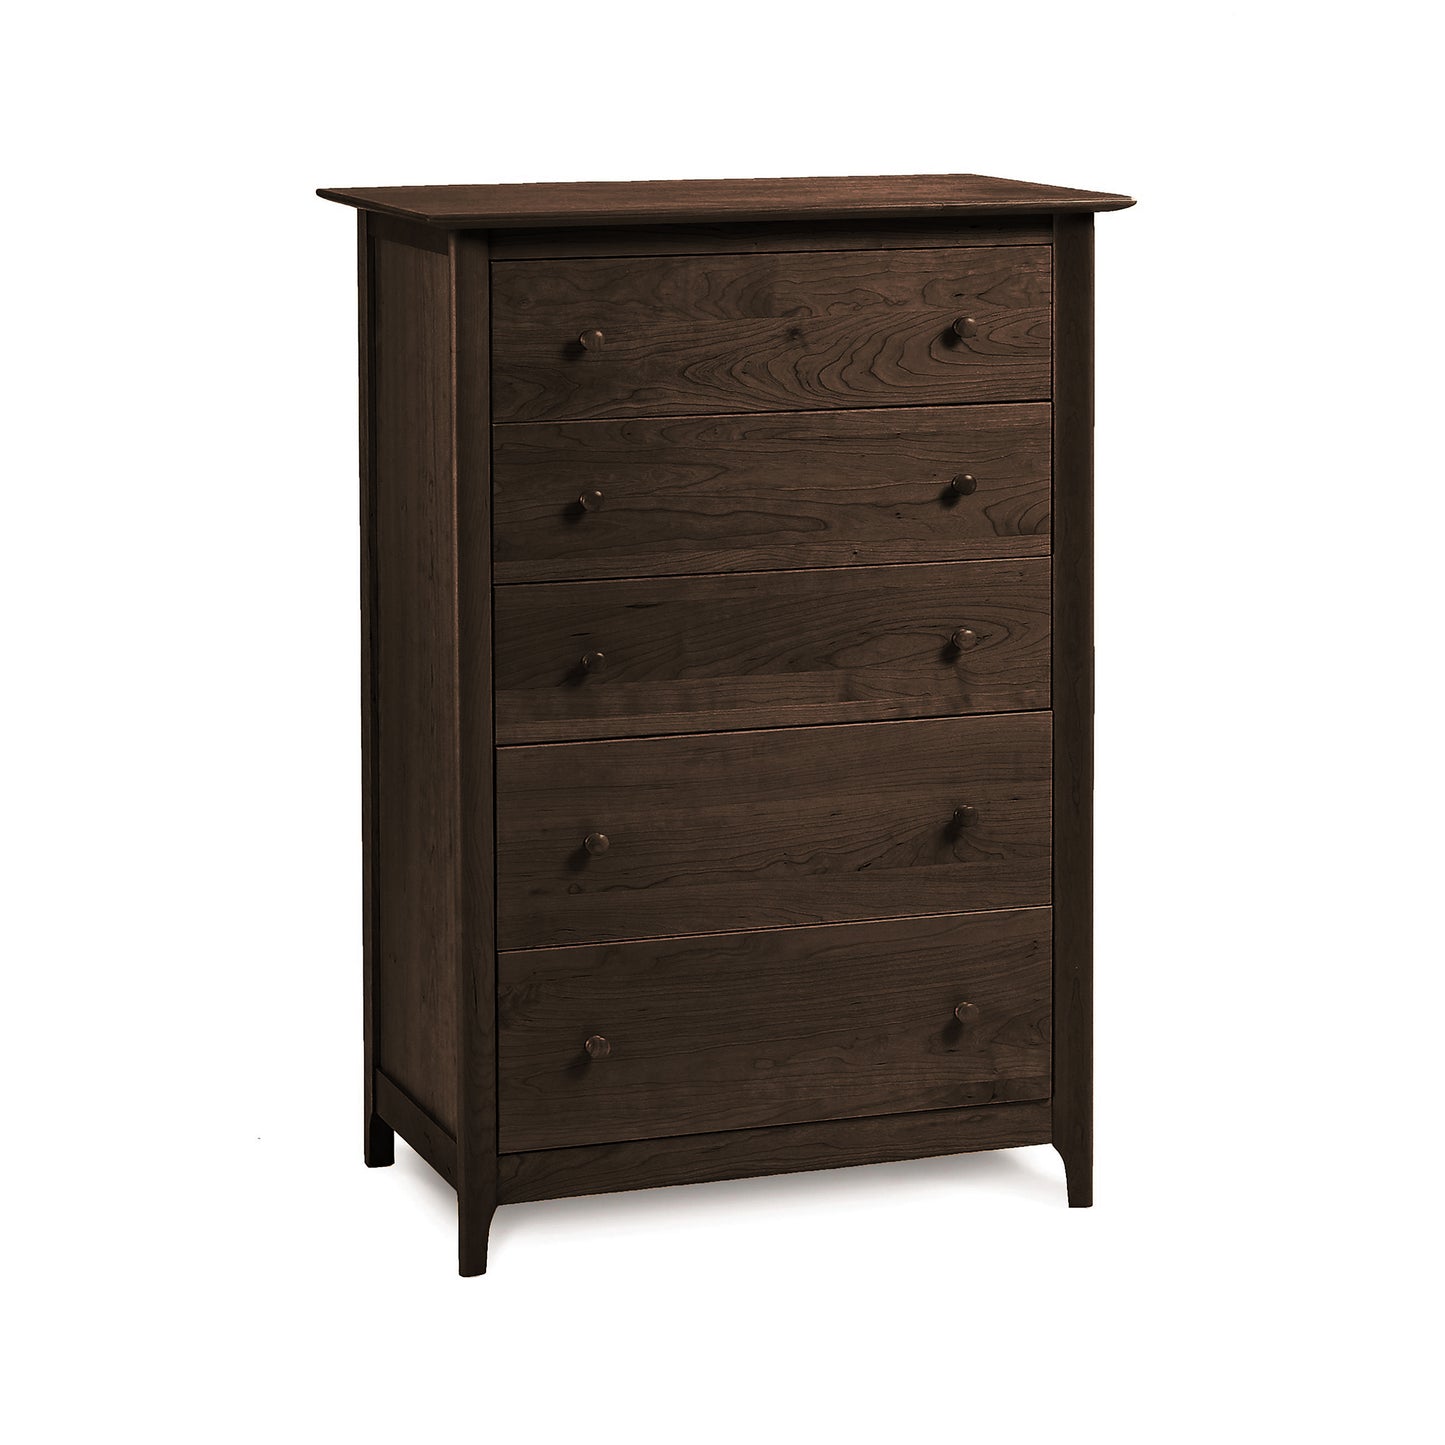 A handmade Sarah 5-Drawer Chest by Copeland Furniture, with a Shaker design on a white background.